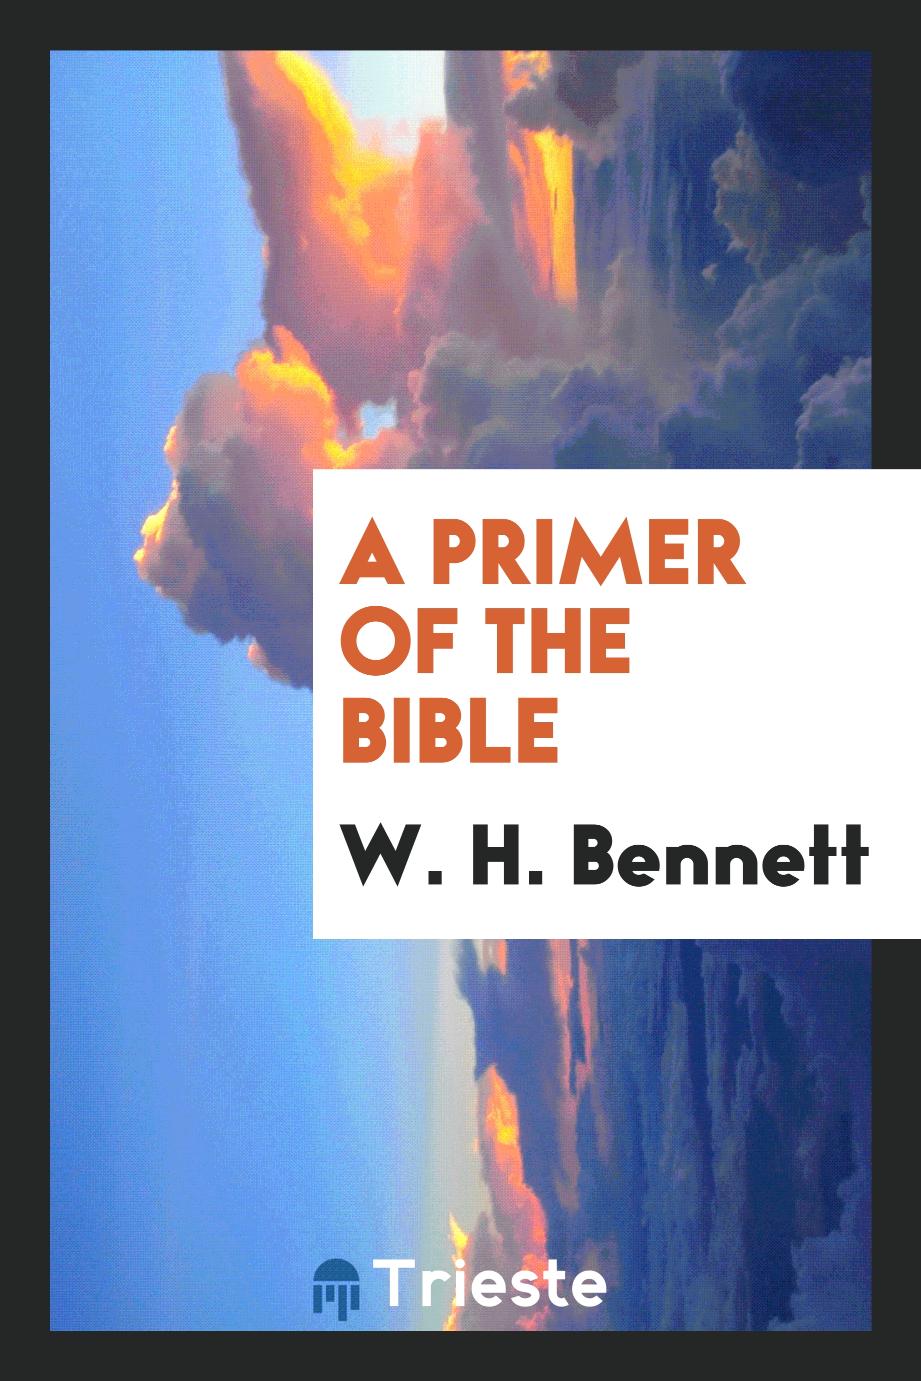 A primer of the Bible